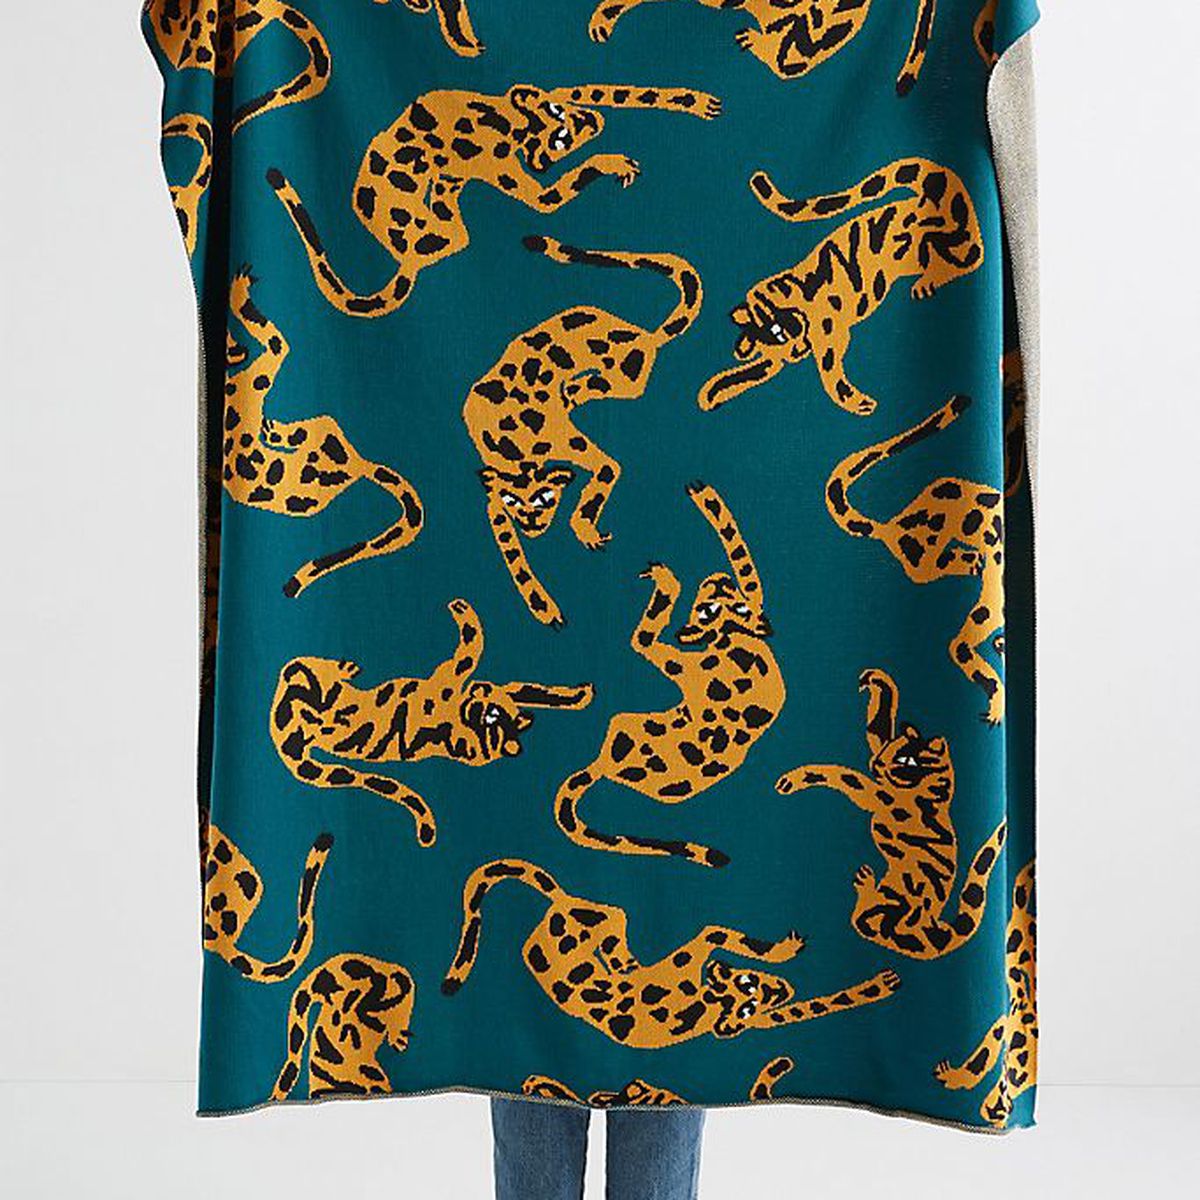 A teal blanket with a leopard print